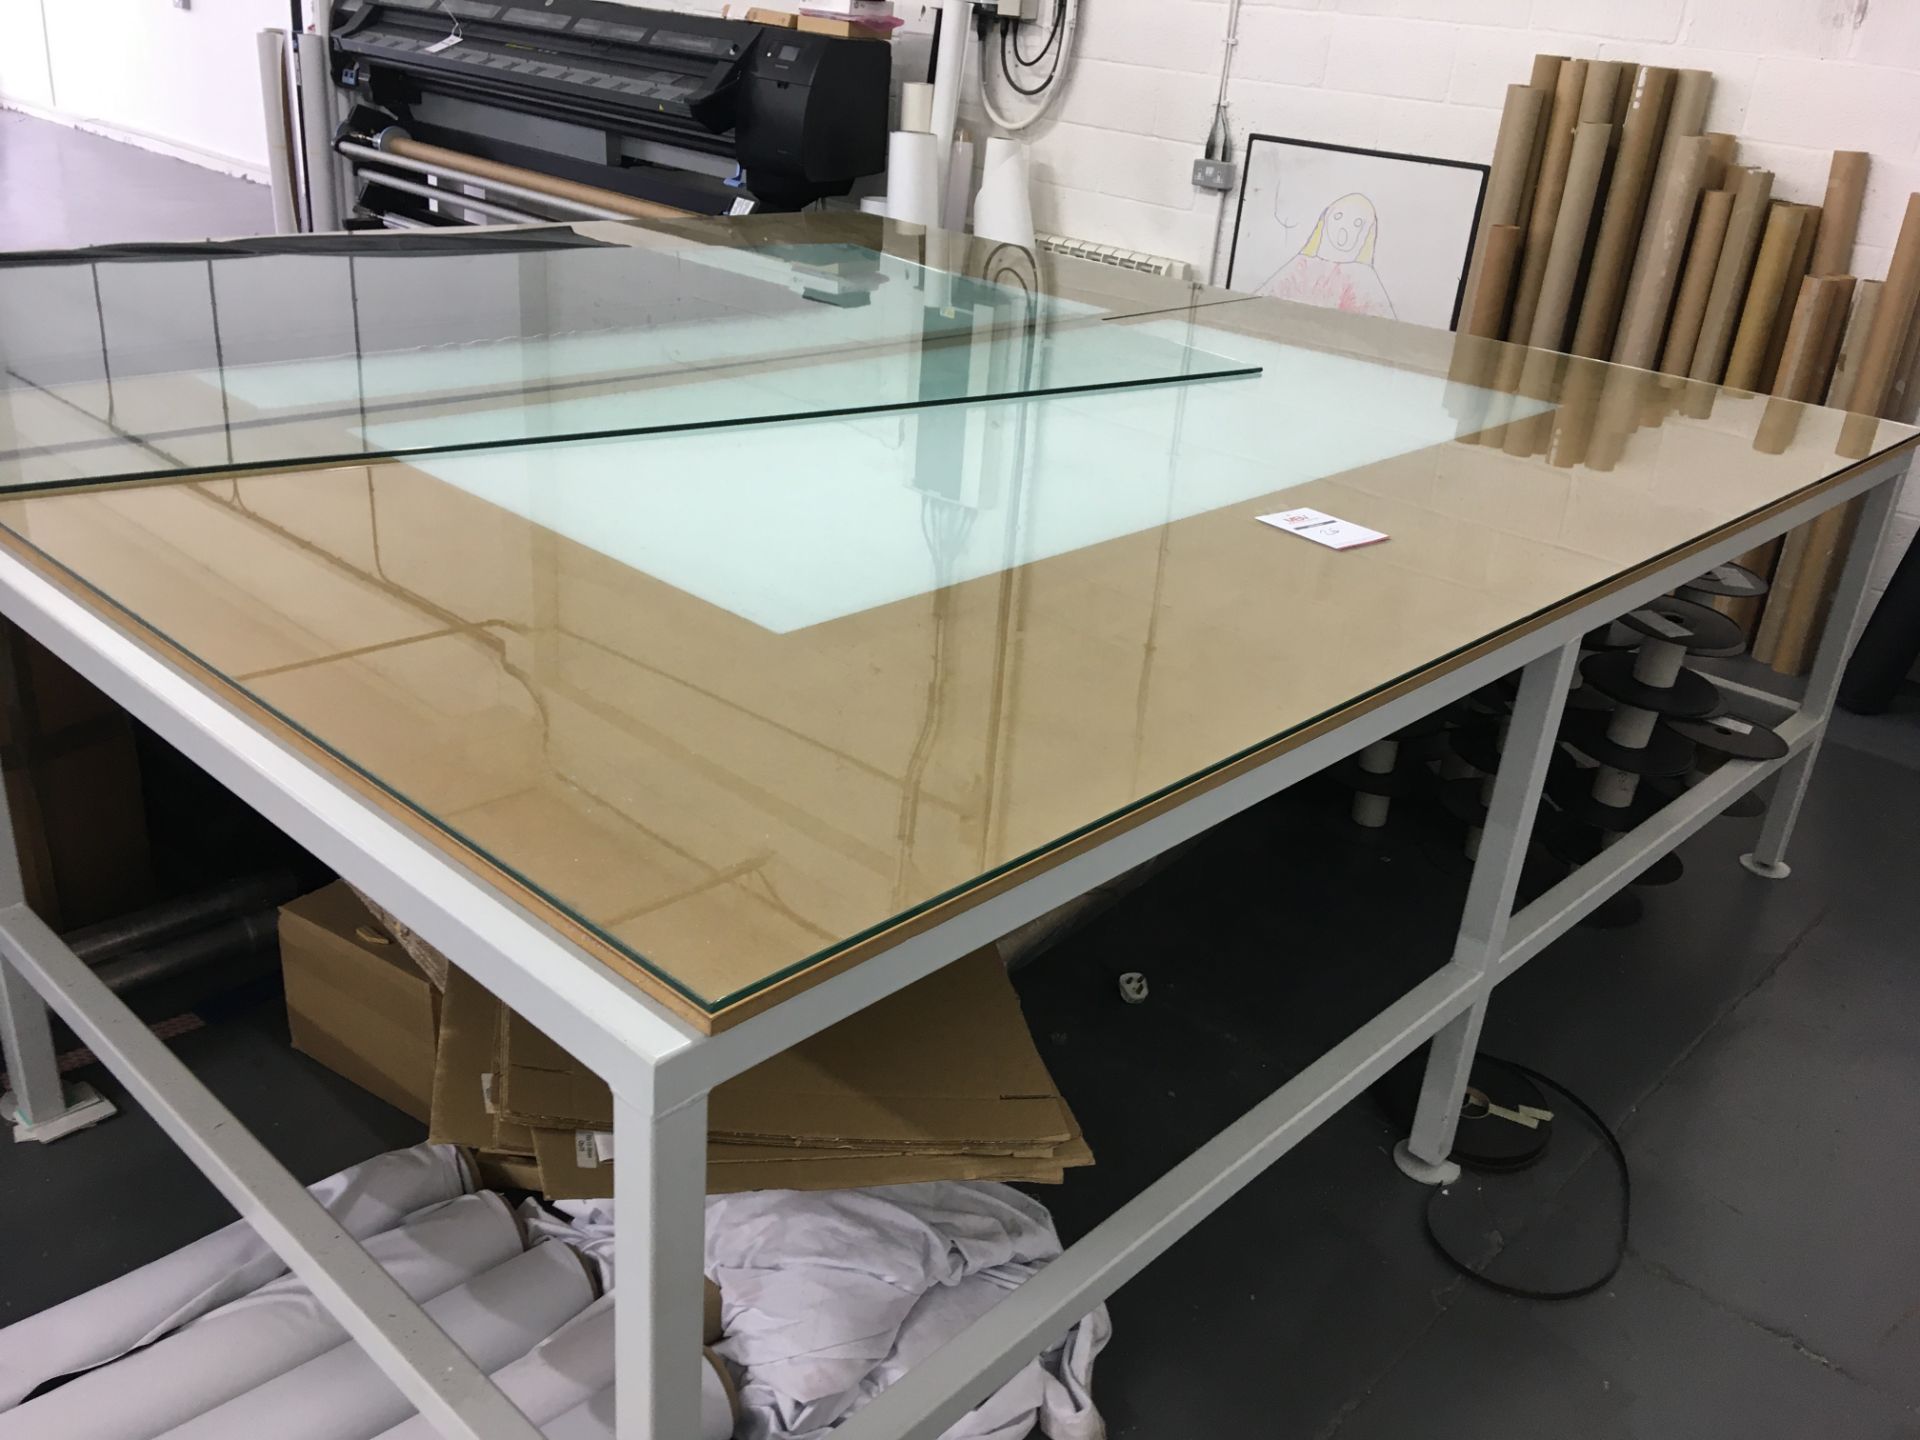 Heavy duty, glass topped alloy framed work table 3.0 x 1.5m - with integral light box.